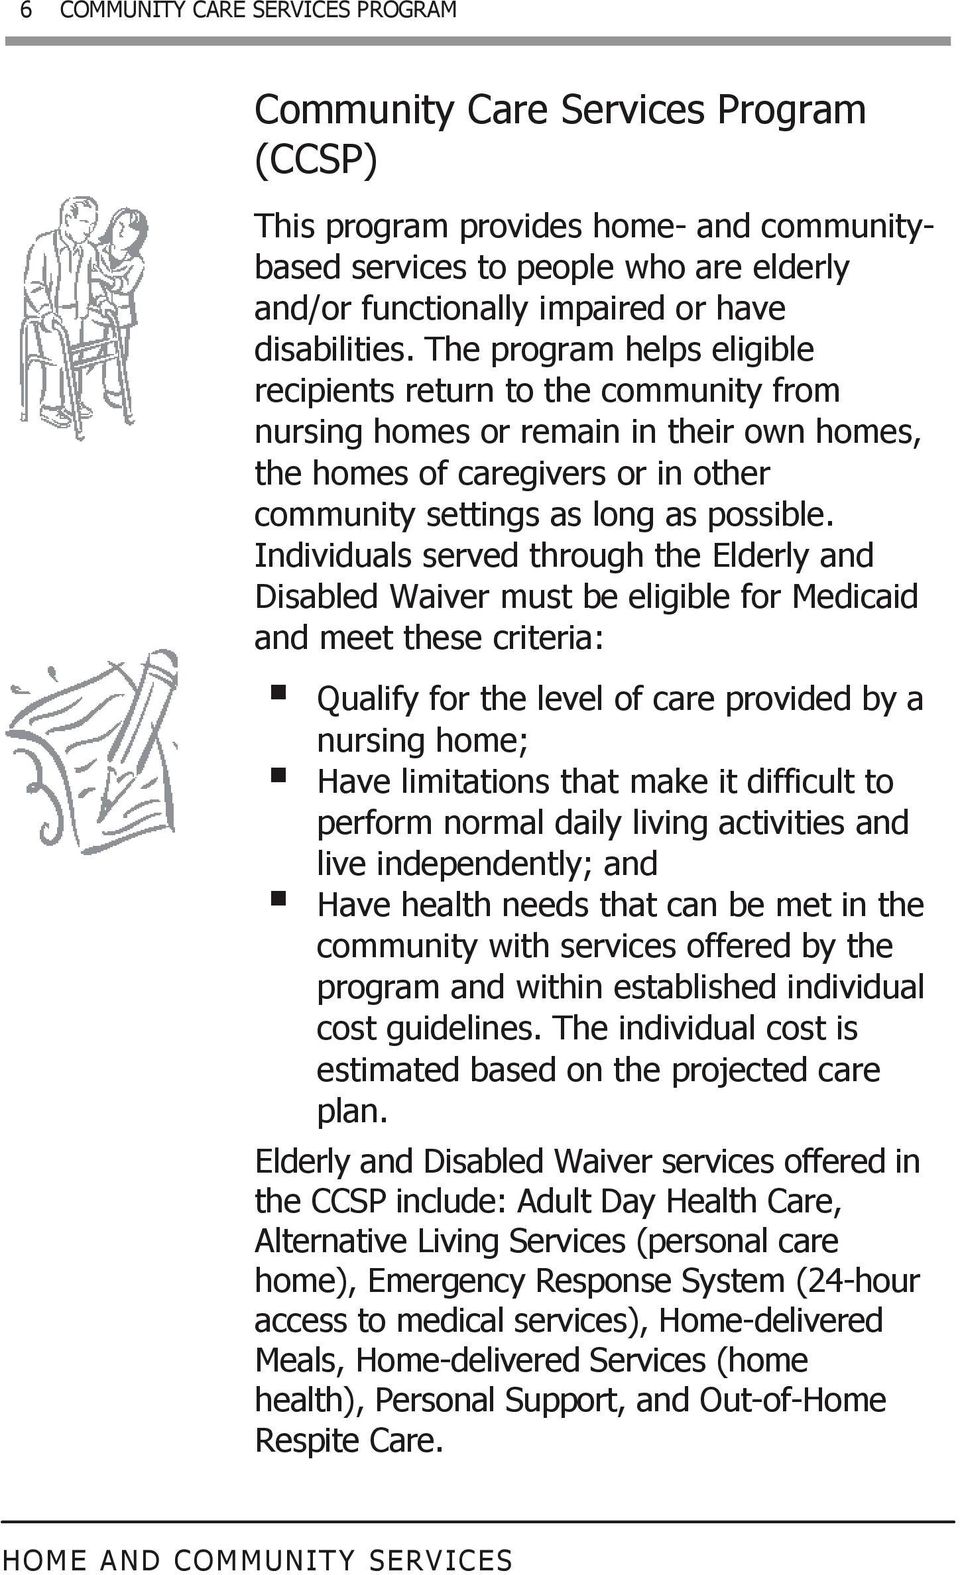 Individuals served through the Elderly and Disabled Waiver must be eligible for Medicaid and meet these criteria: Qualify for the level of care provided by a nursing home; Have limitations that make